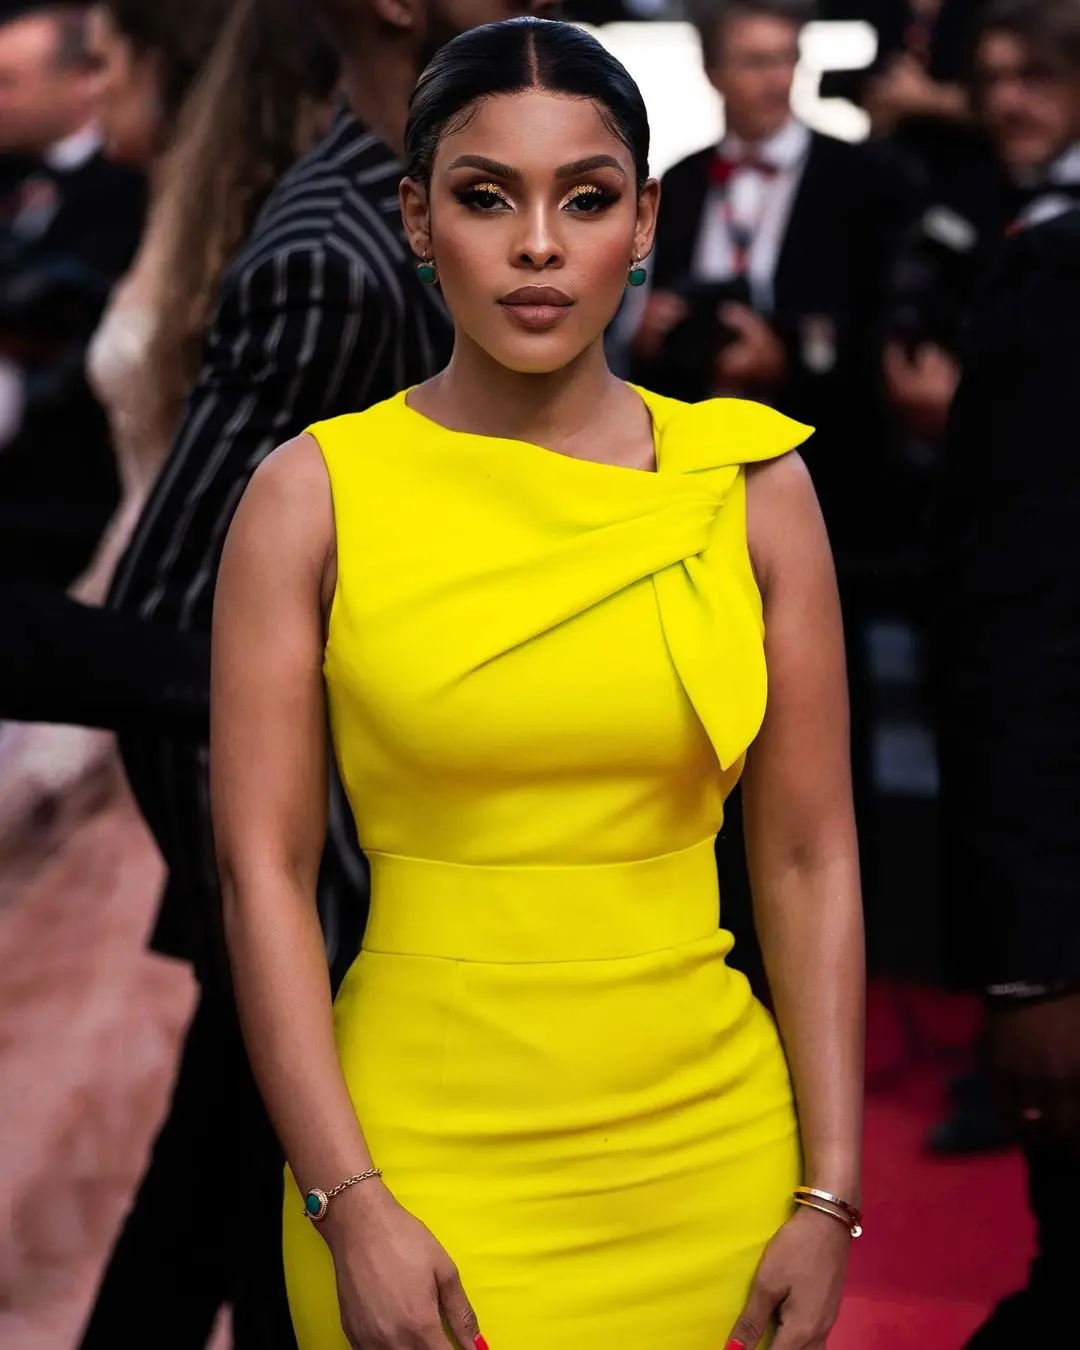 Photos: Kefilwe Mabote serves hot looks at Cannes Film Festival 2022